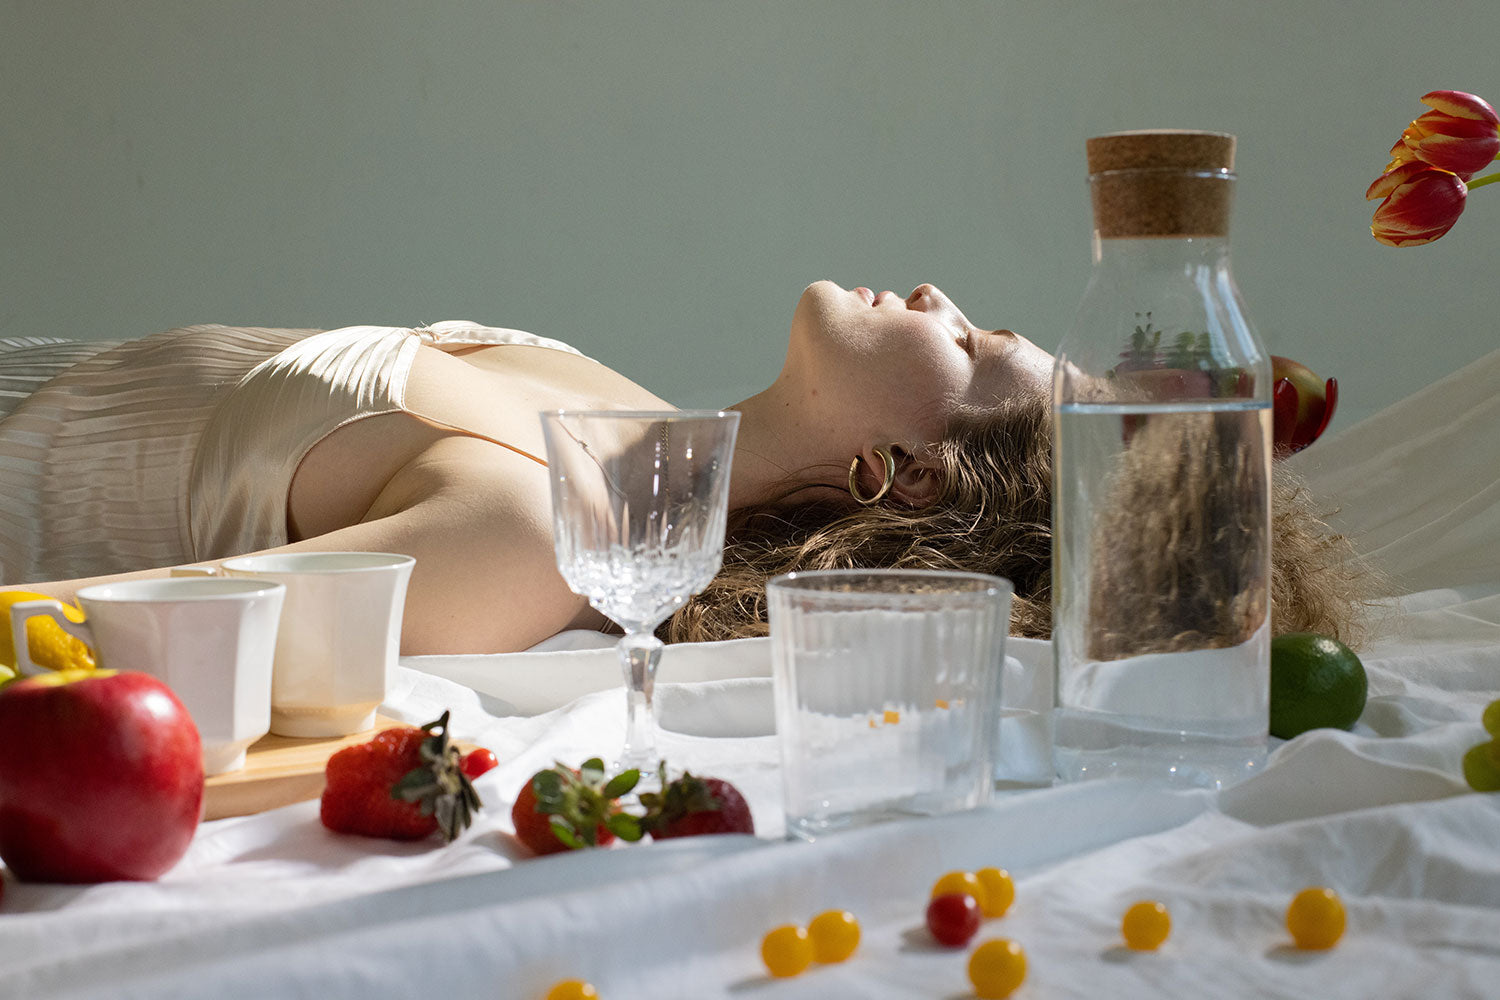 A peaceful young woman in a bra top lays with her eyes closed near assorted glassware and fresh fruit on a blanket. Image by Jill Burrow.